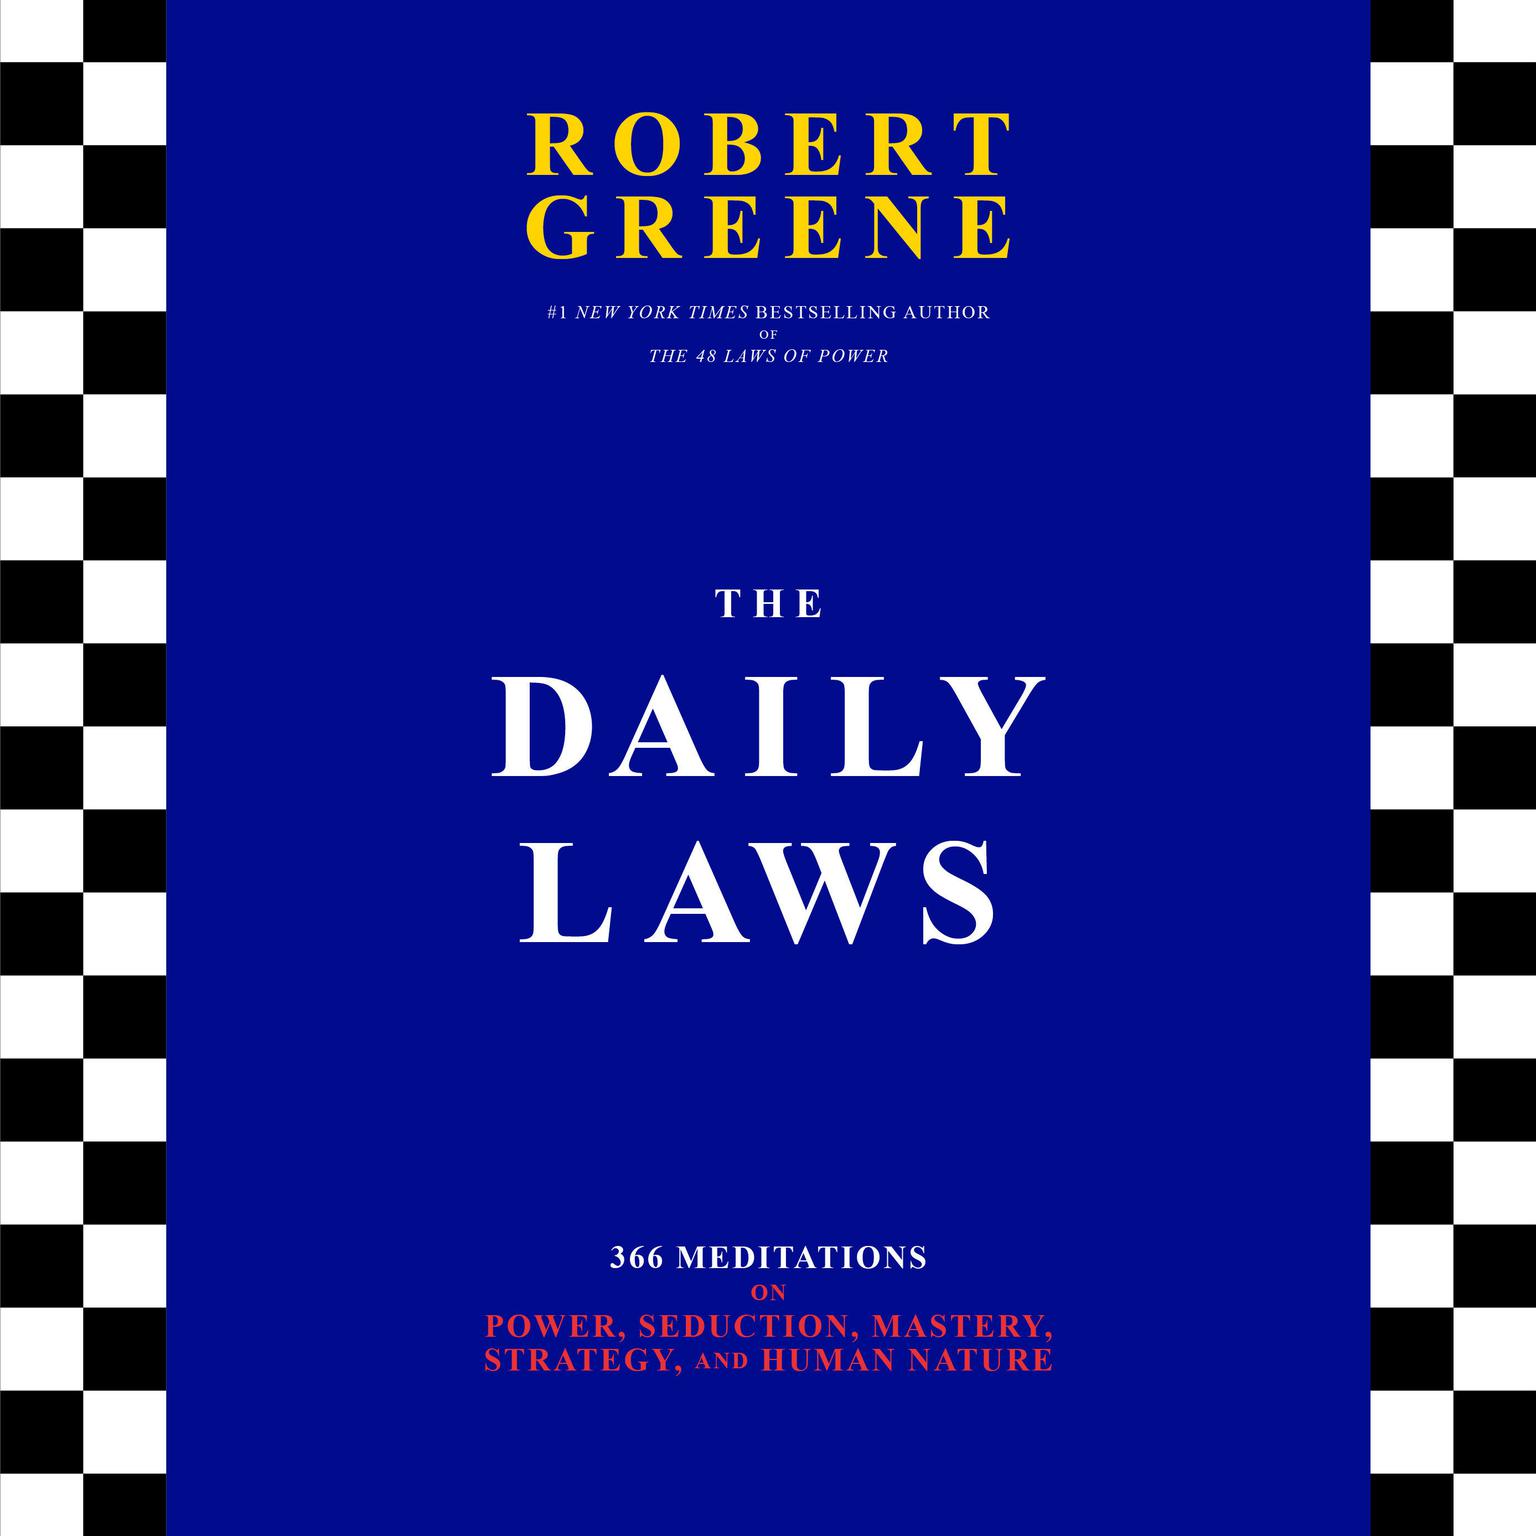 The Daily Laws: 366 Meditations on Power, Seduction, Mastery, Strategy, and Human Nature Audiobook, by Robert Greene